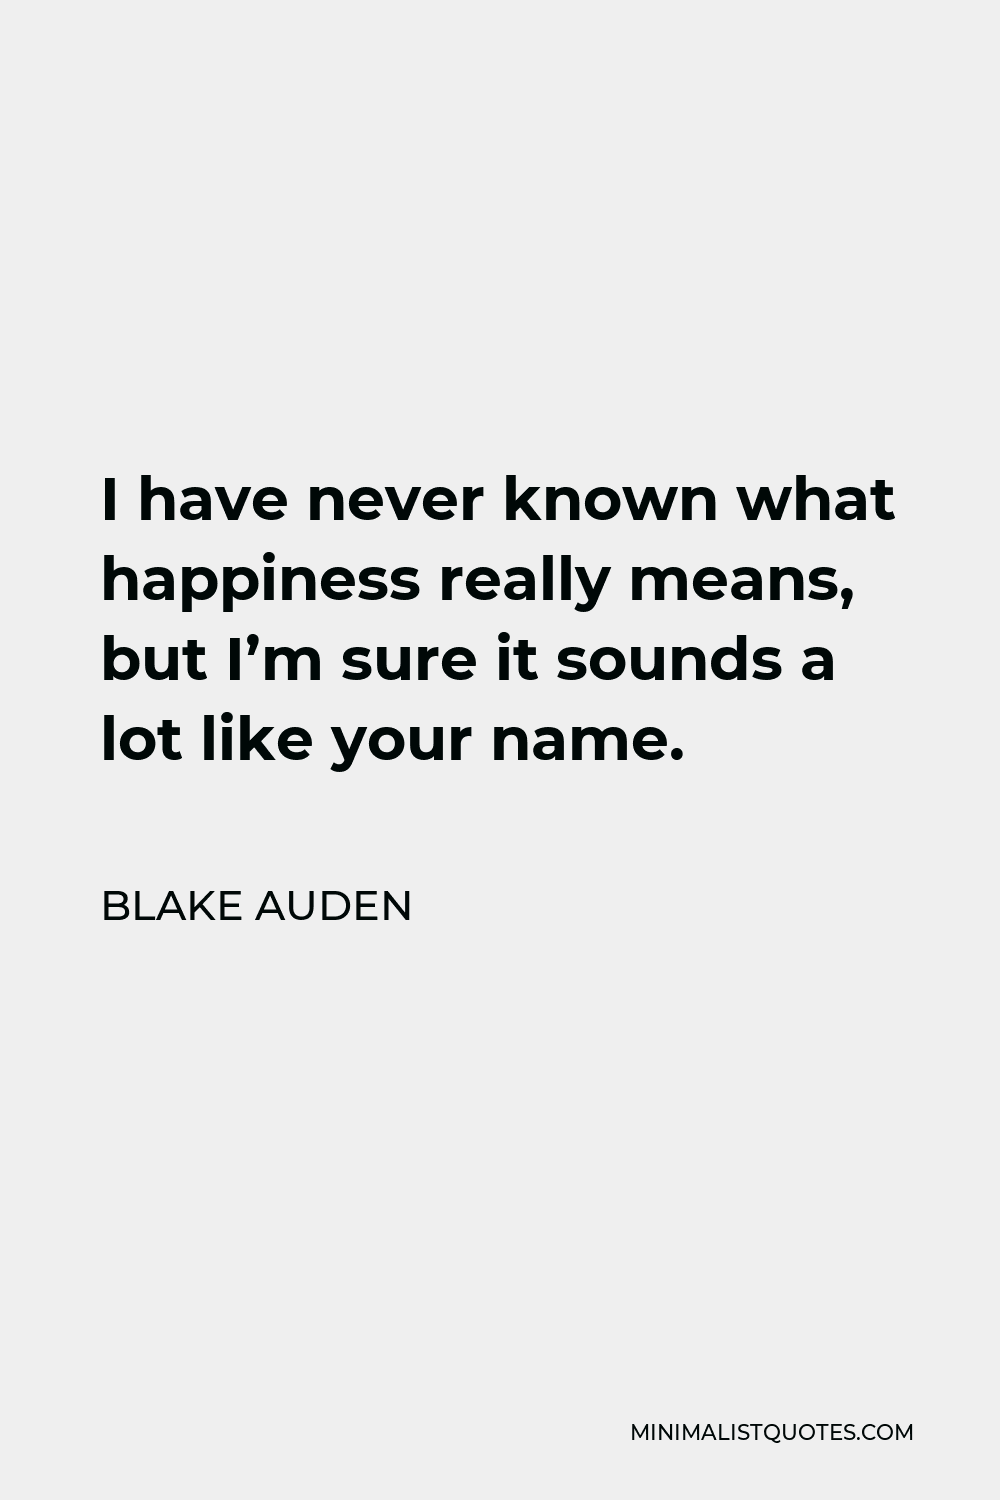 Blake Auden Quote - I have never known what happiness really means, but I’m sure it sounds a lot like your name.